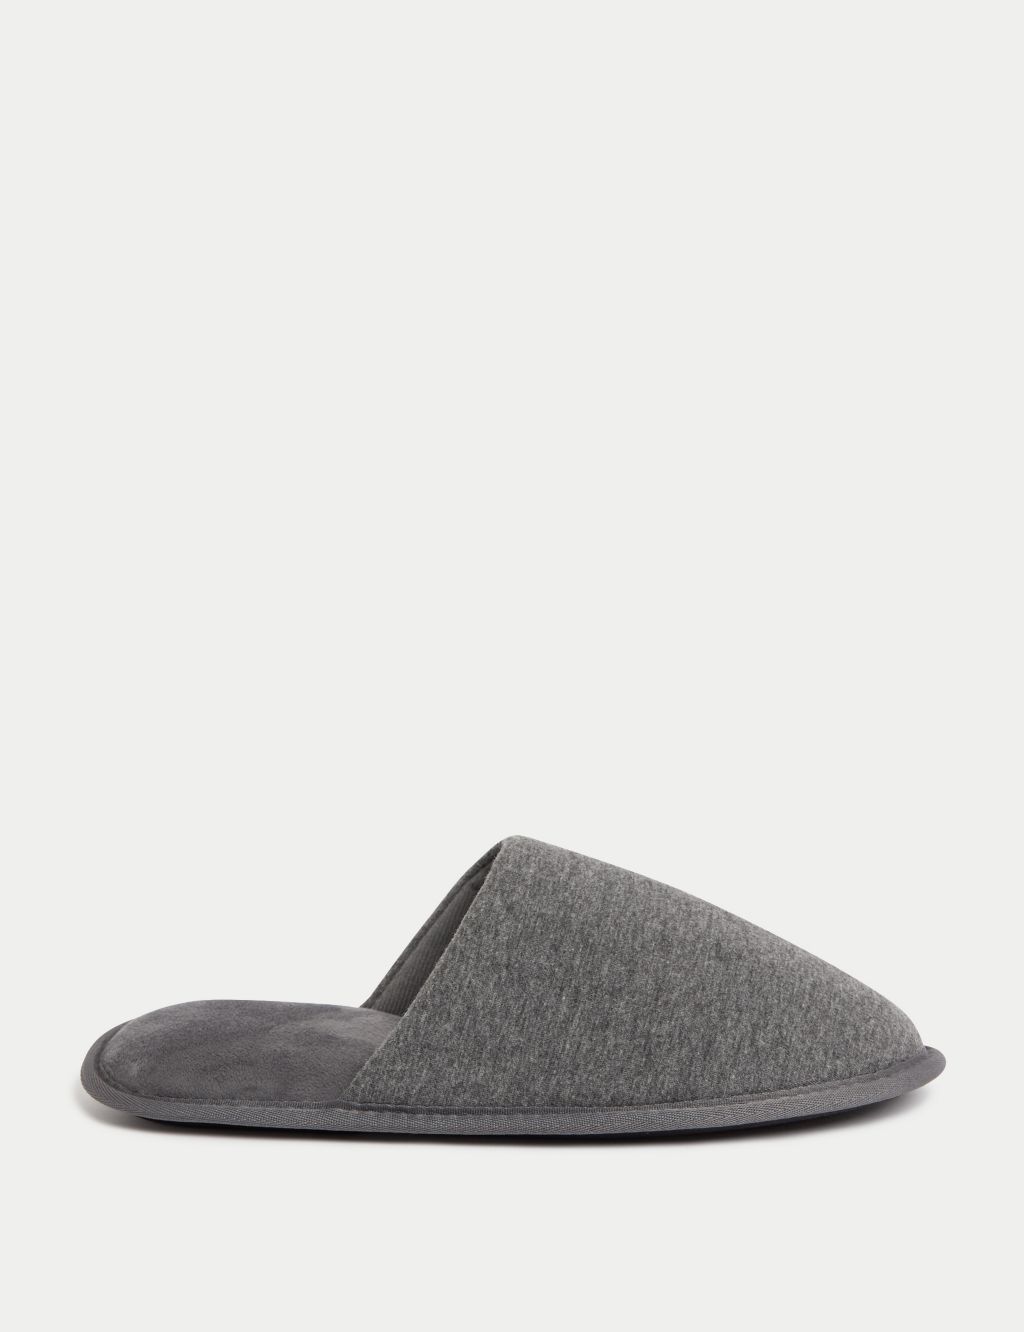 Mule Slippers with Freshfeet™ image 1